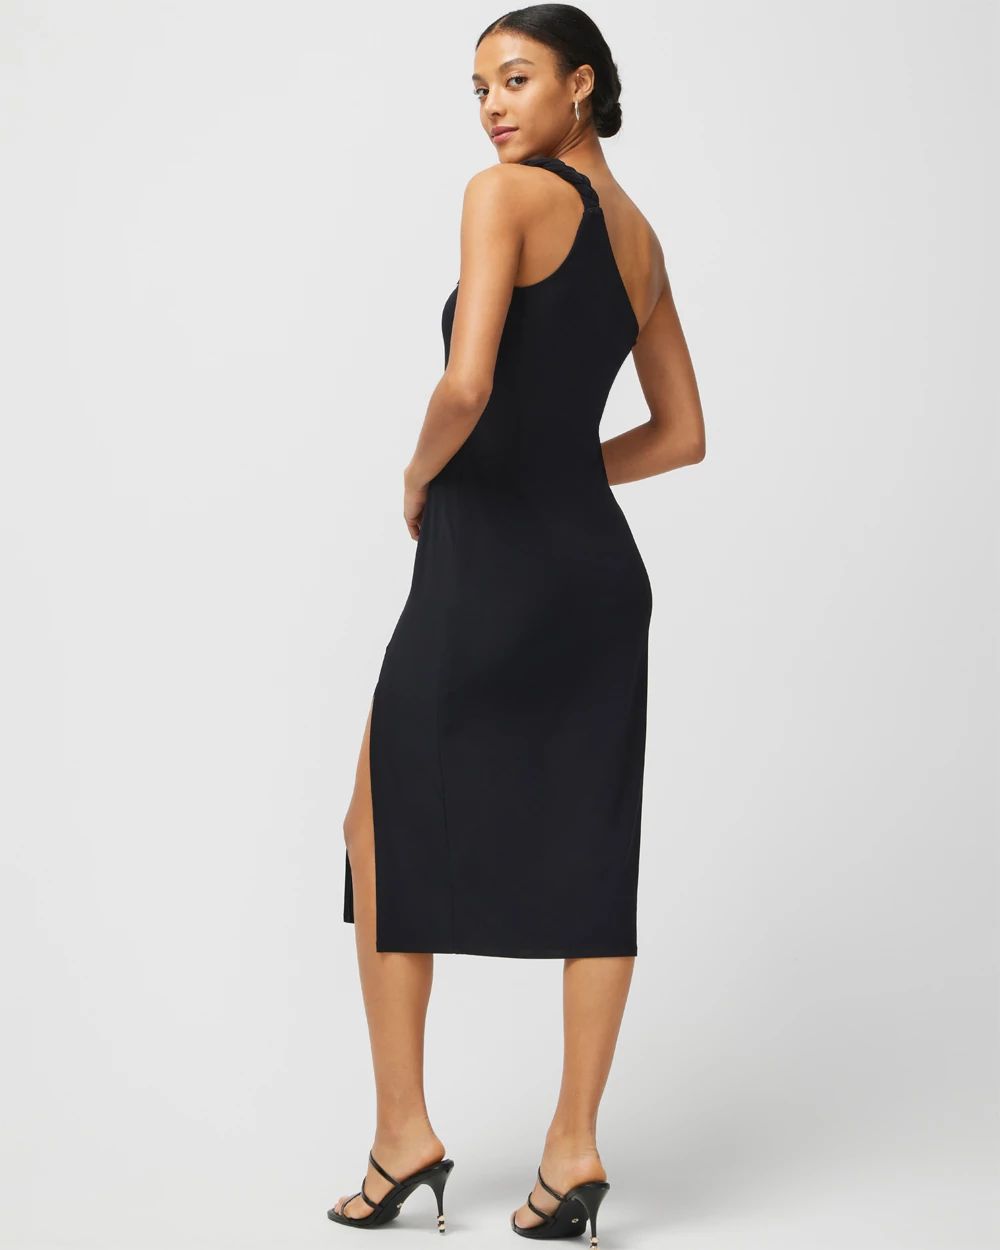 One-Shoulder Embroidered Matte Jersey Midi Dress click to view larger image.